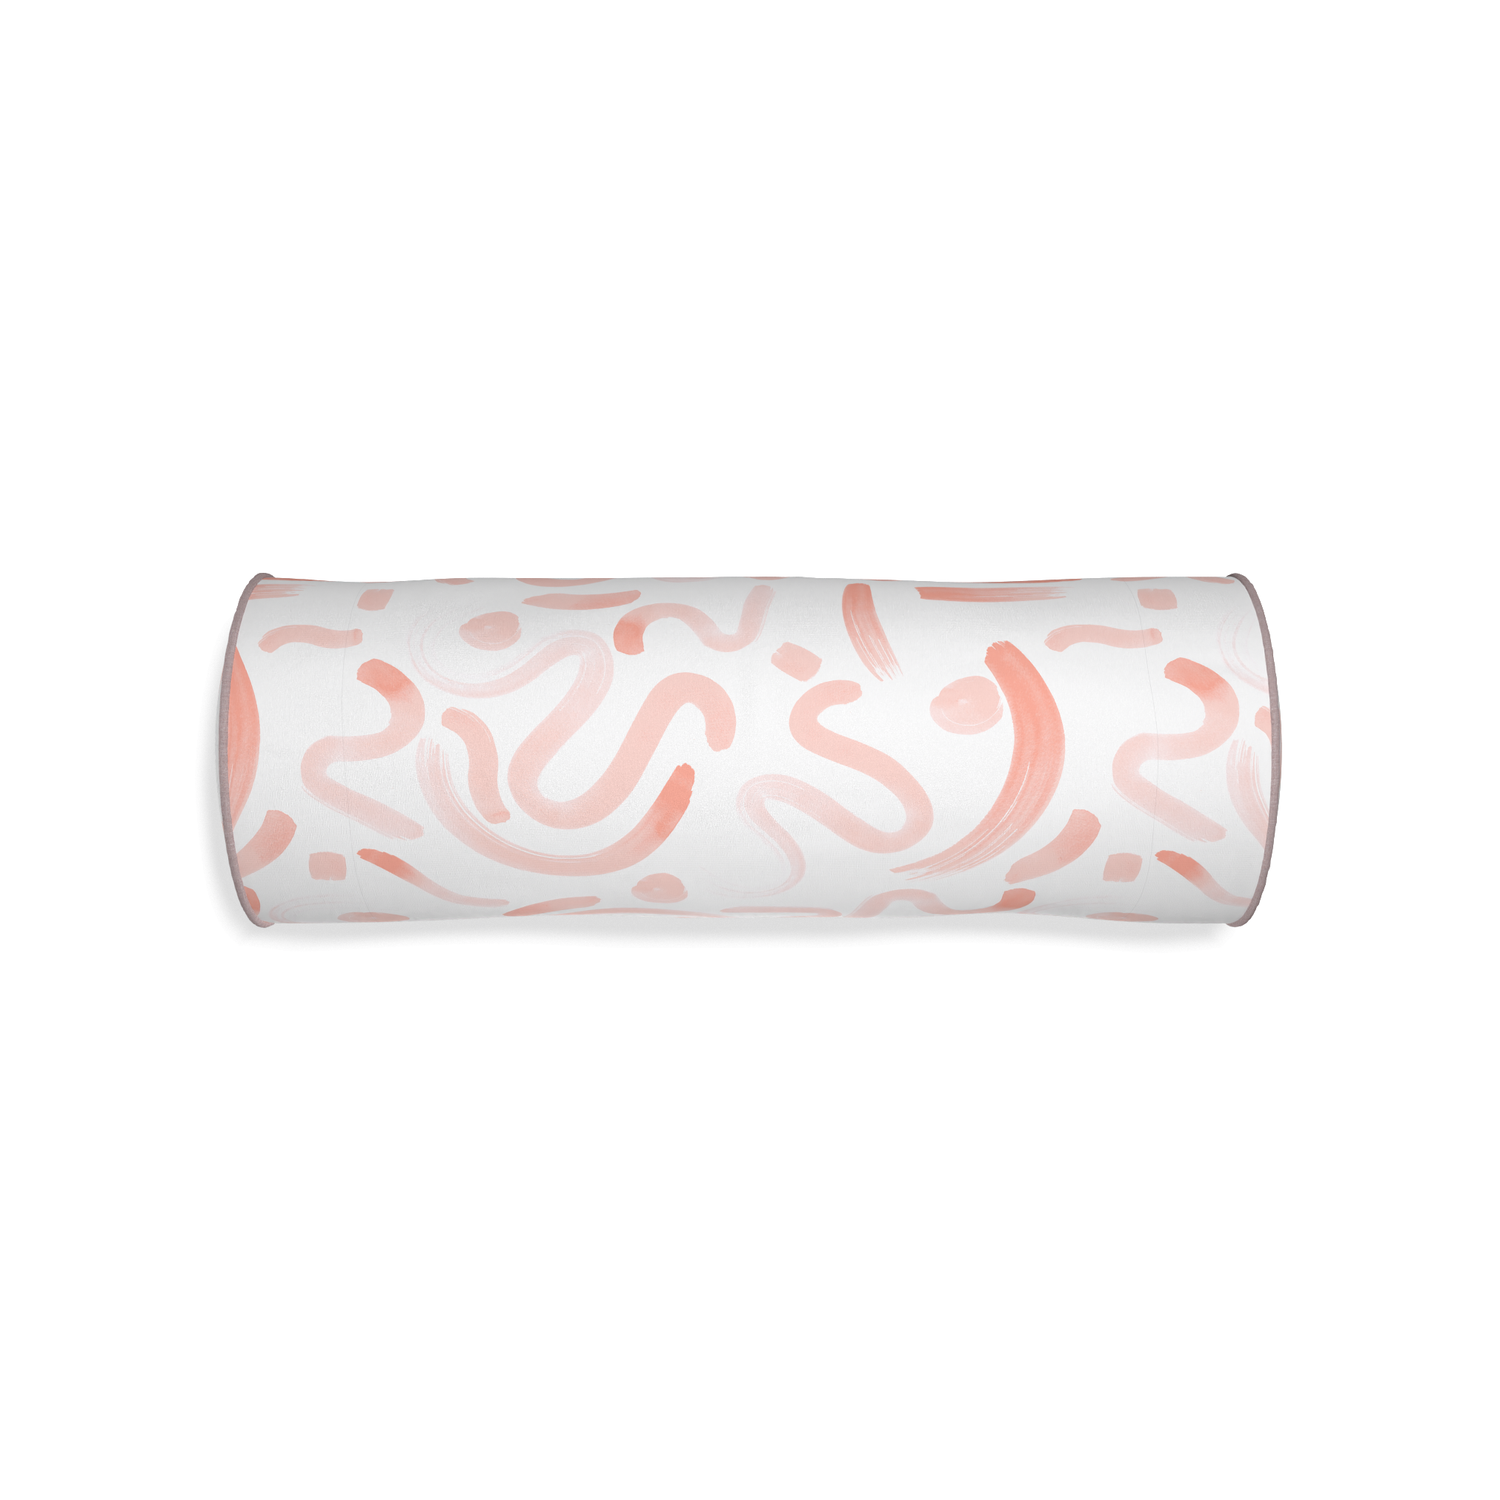 Bolster hockney pink custom pink graphicpillow with orchid piping on white background